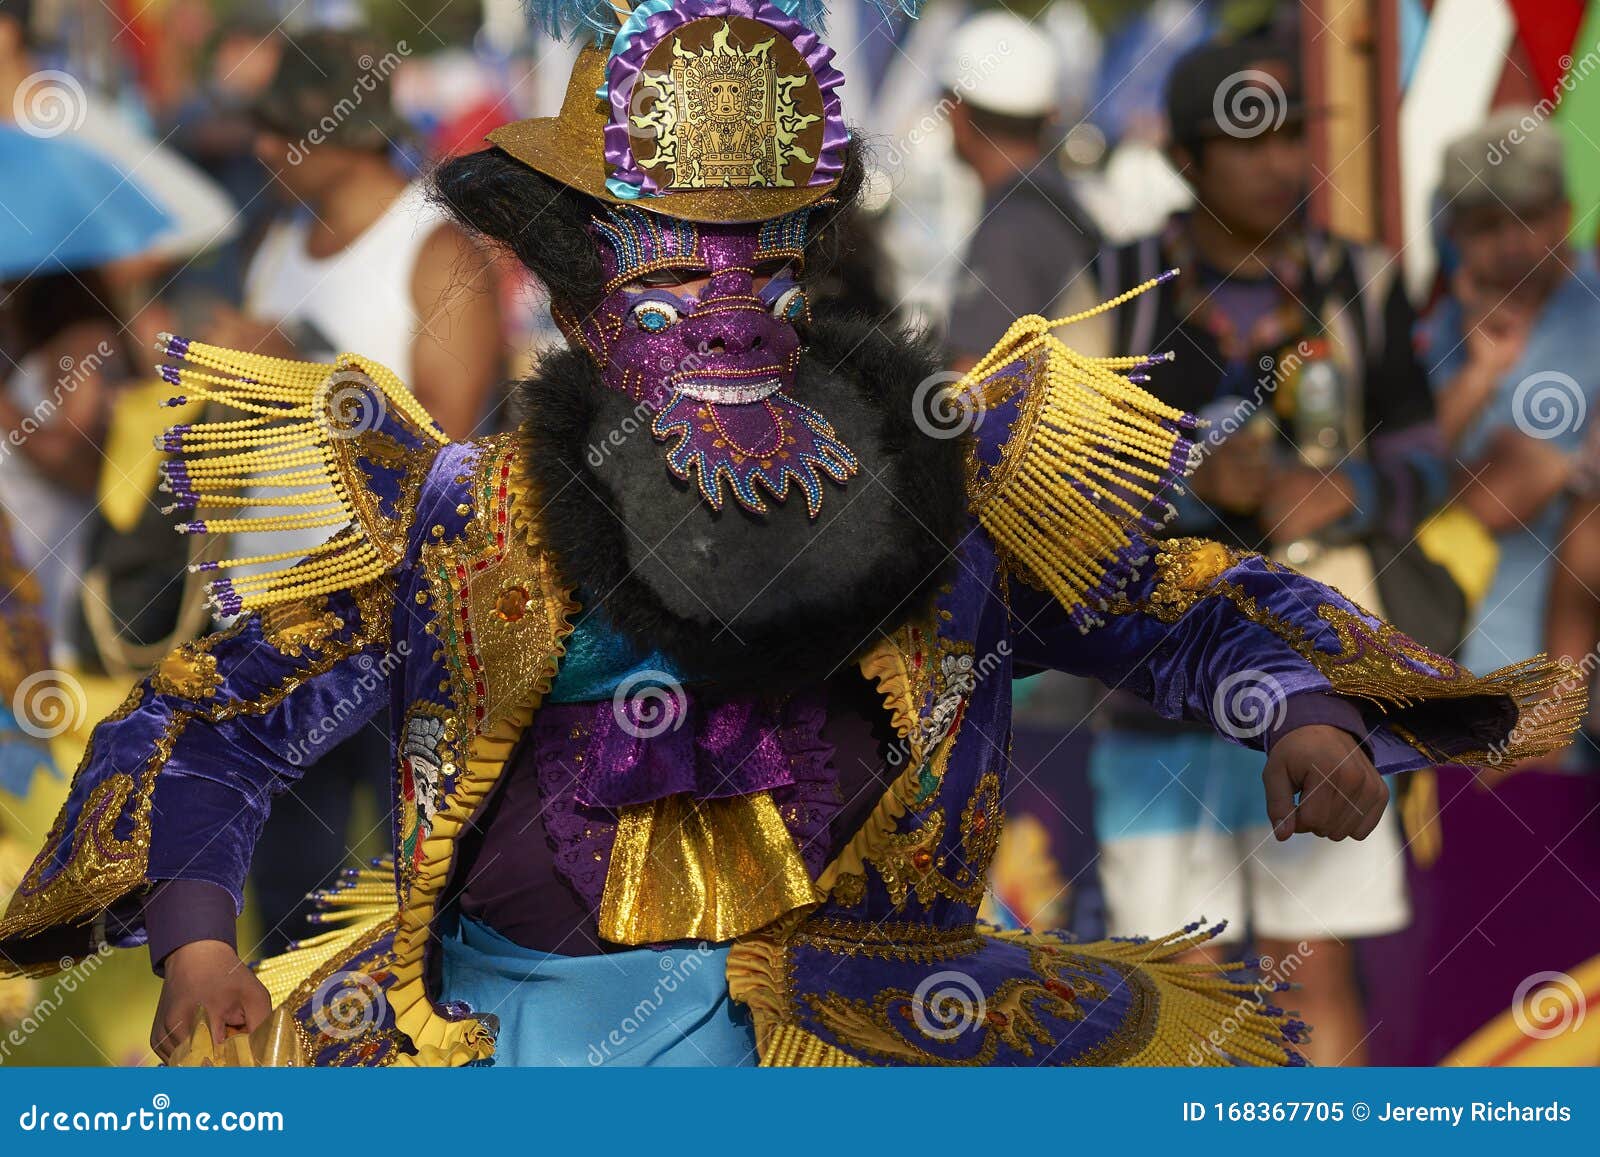 Morenada Dance Group at the Arica Carnival, Chile Editorial Image ...